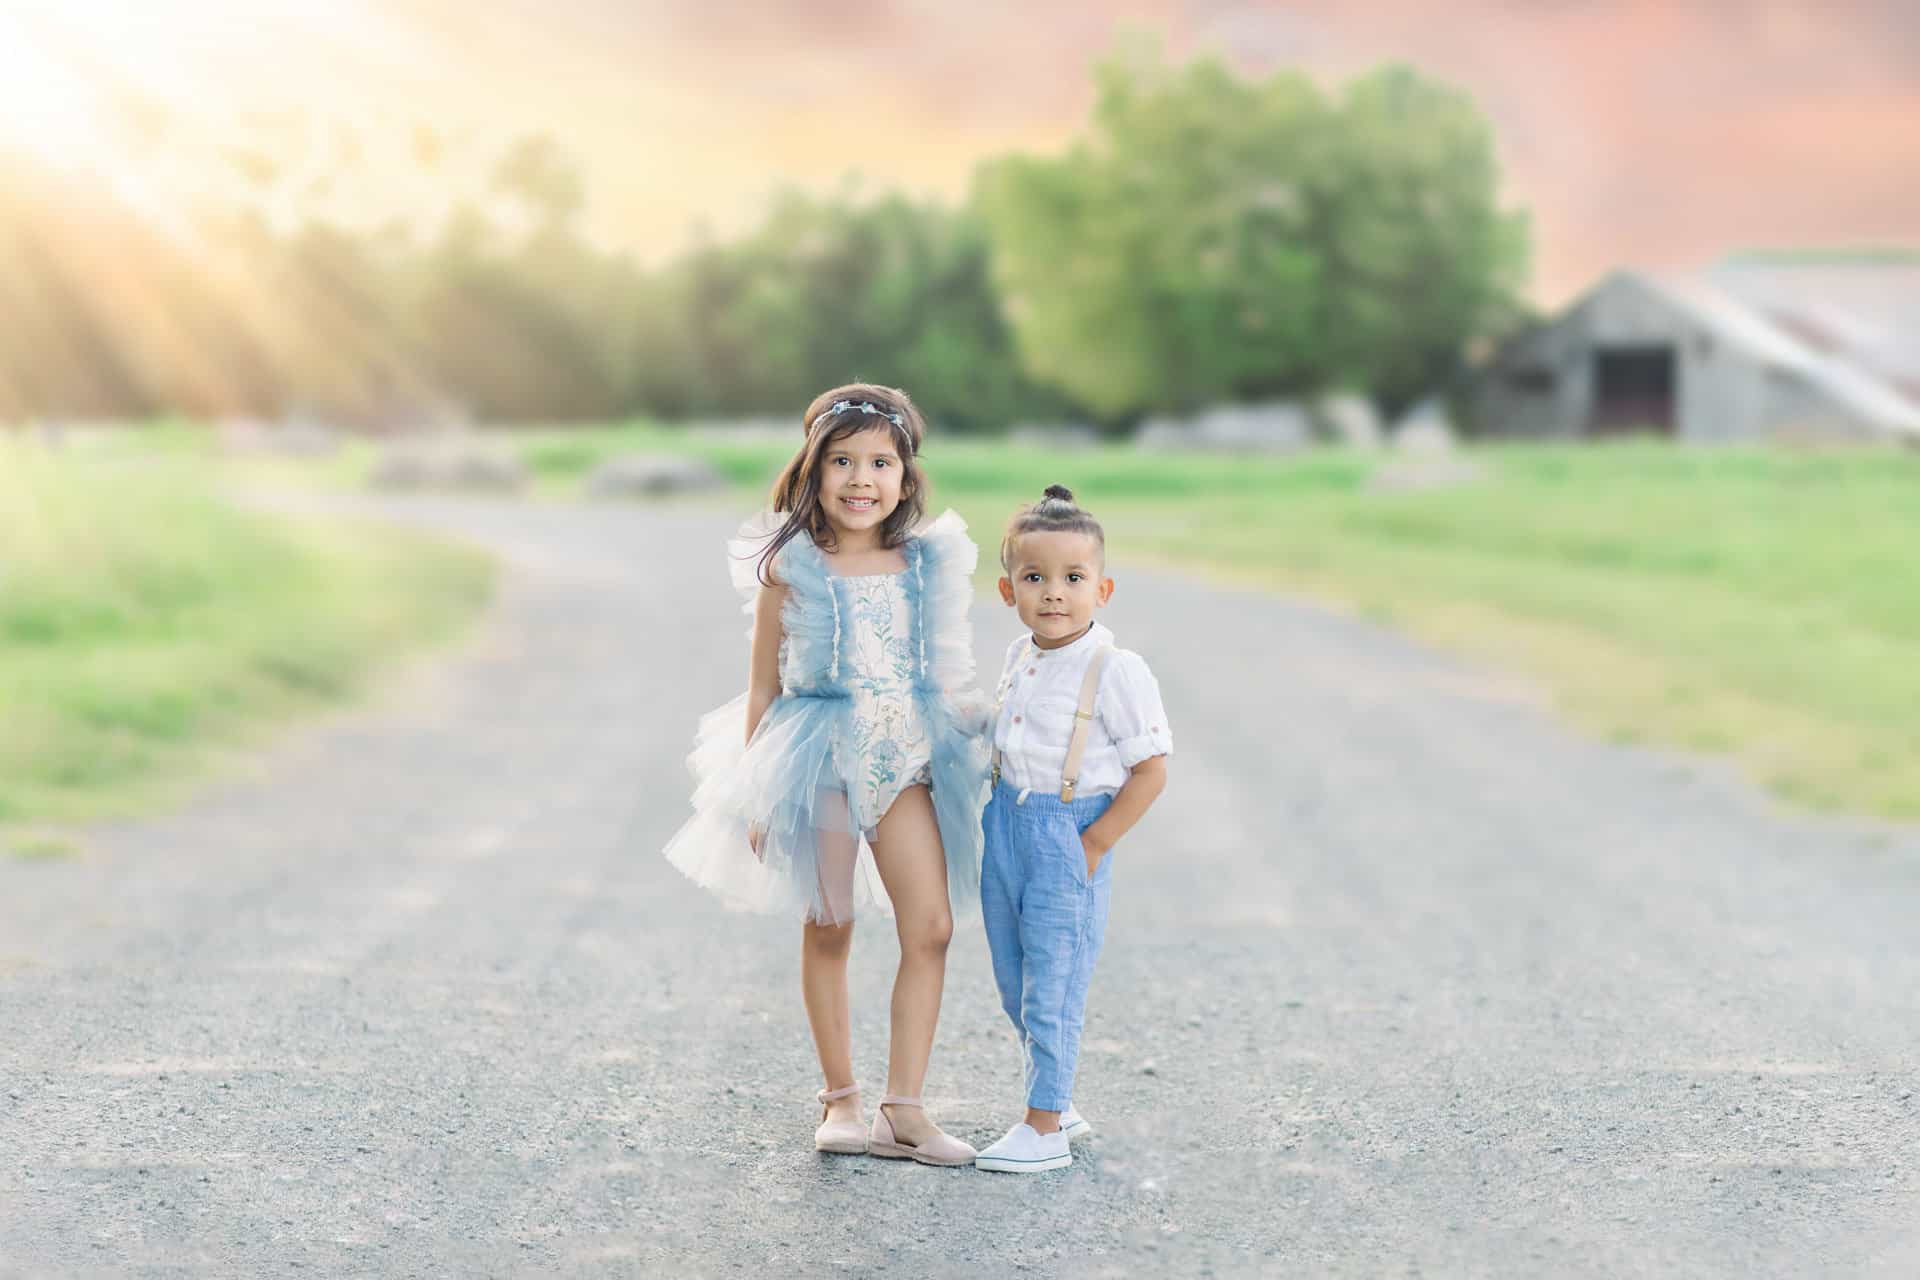 brother and sister in boutique clothing, posing at sunset, photographed by child photographer Amanda Barrett